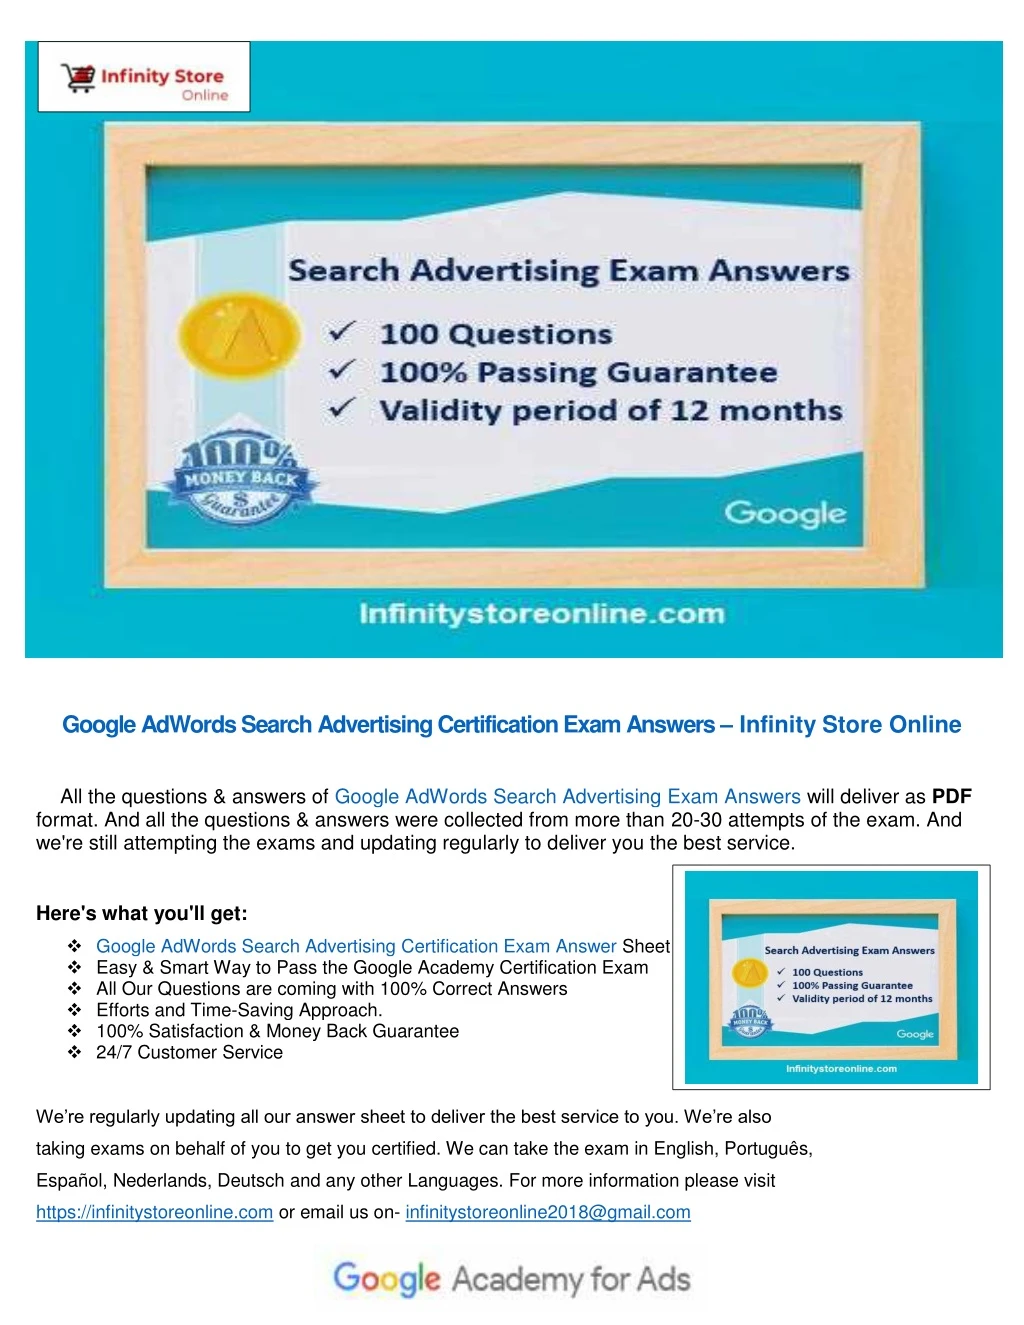 google adwords search advertising certification